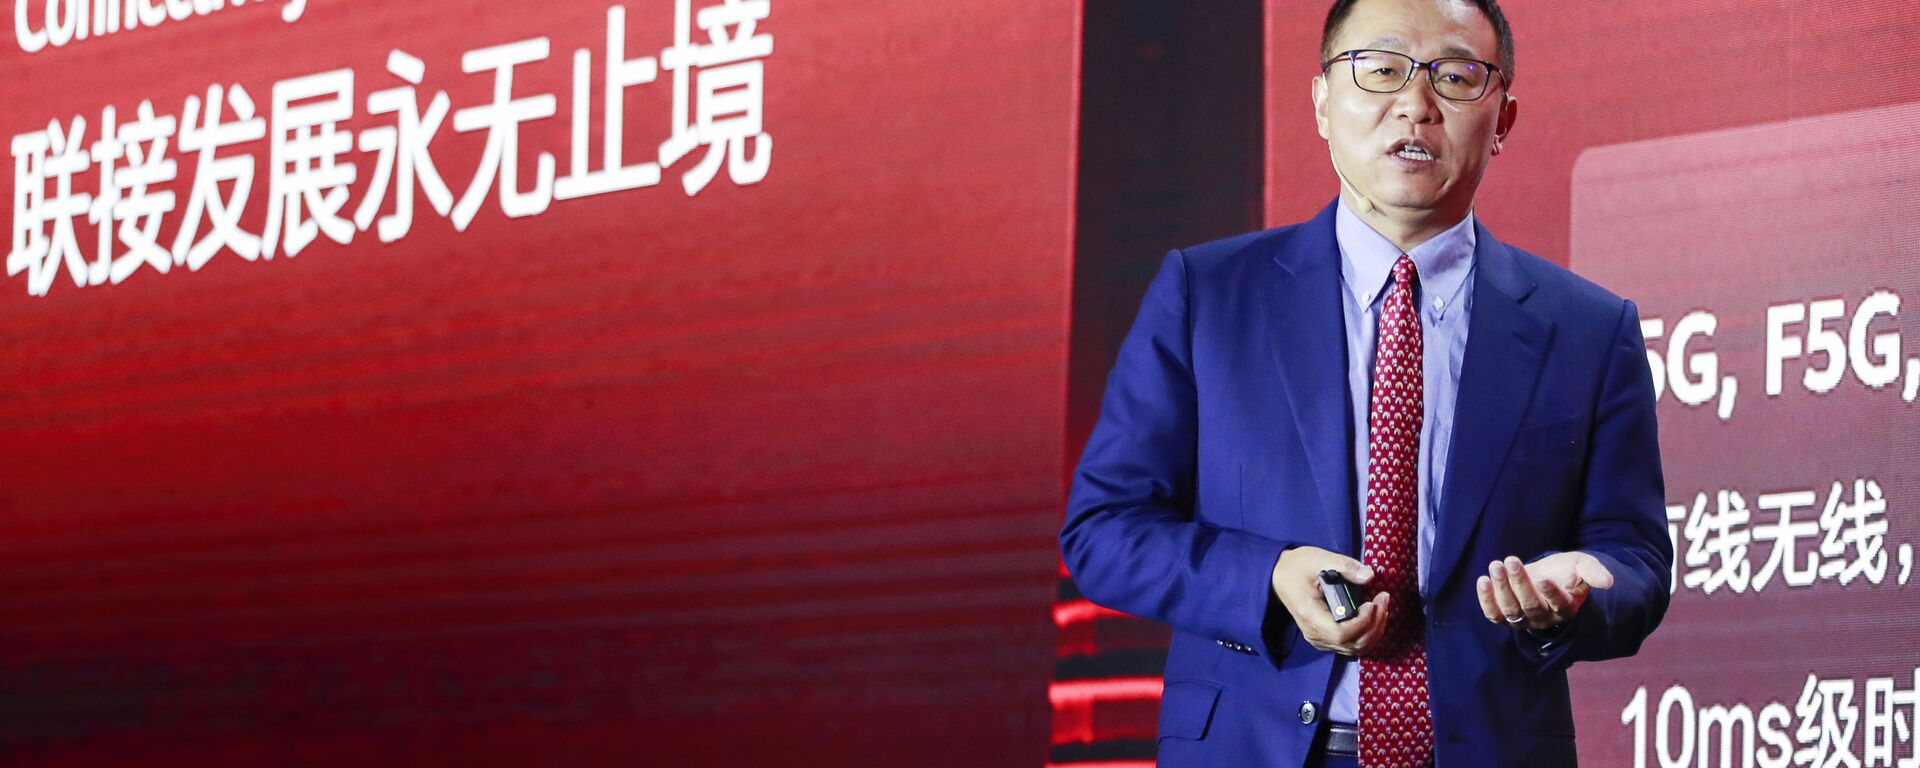 David Wang, Huawei executive director and chairman of the investment review board, speaks at the Huawei Ultra-Broadband 2020 Event in Beijing on 14 October 2020 - Sputnik International, 1920, 07.01.2021